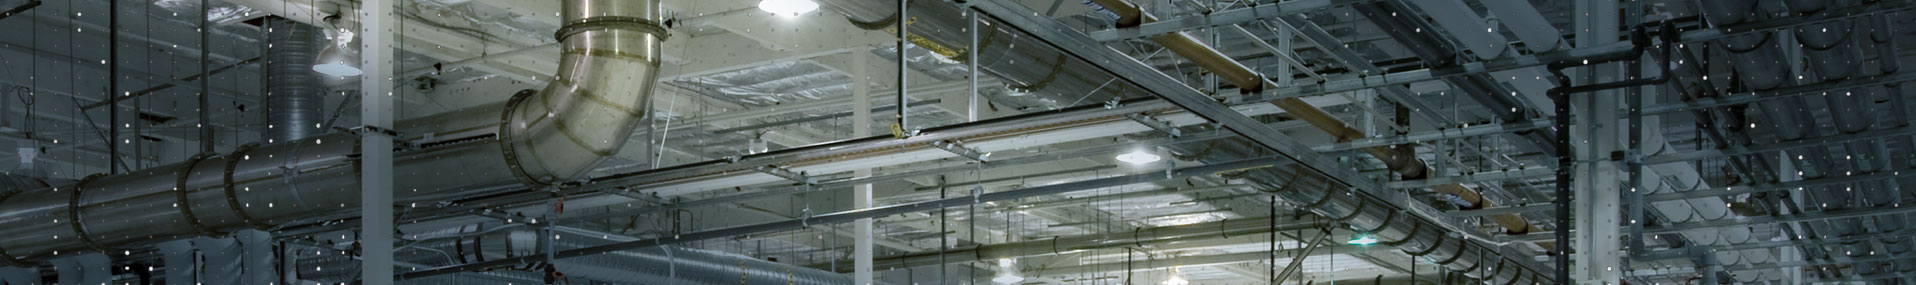 Industrial warehouse ceiling banner